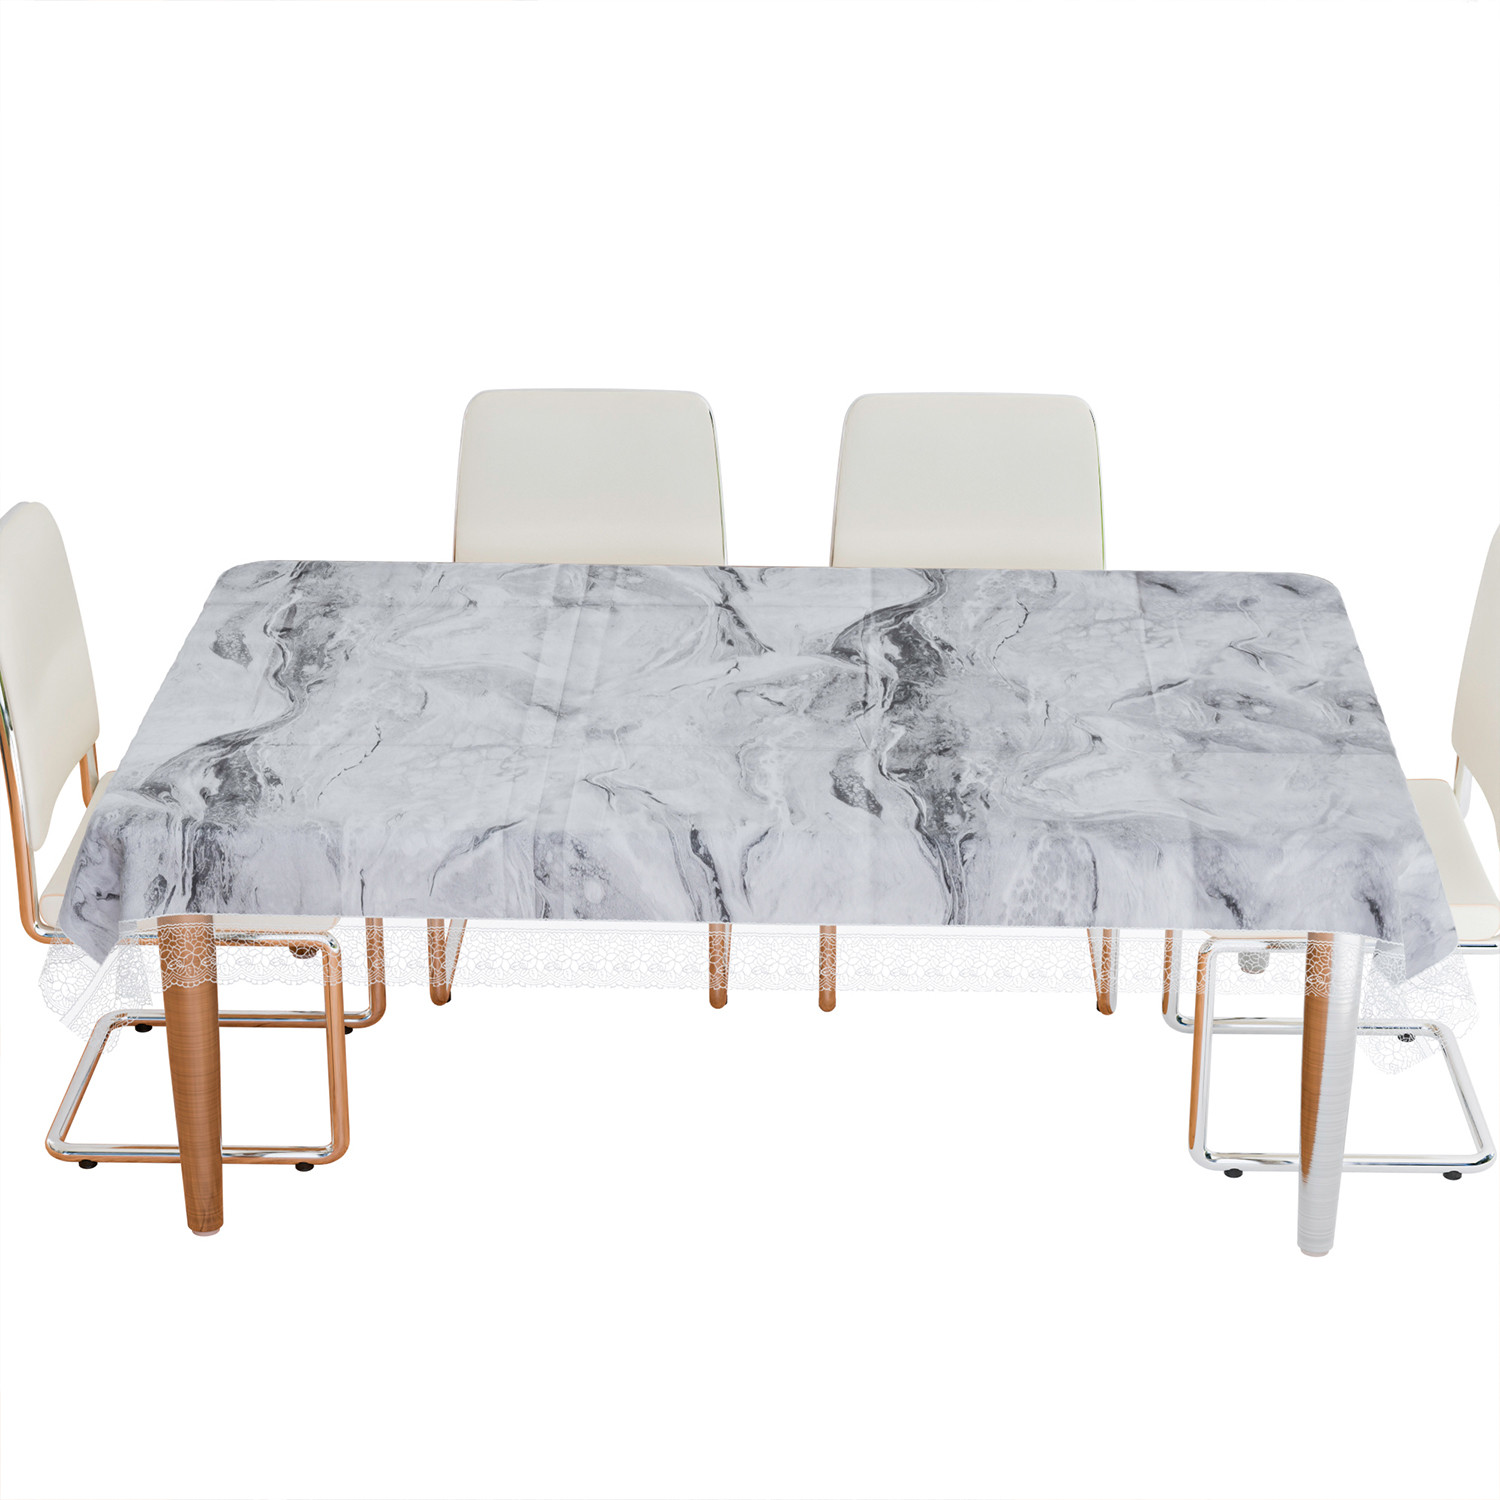 Kuber Industries Dining Table Cover | PVC Table Cloth Cover | 6 Seater Table Cloth | Marble Table Cover | Table Protector | Table Cover for Dining Table | 60x90 Inch | DTC | Gray